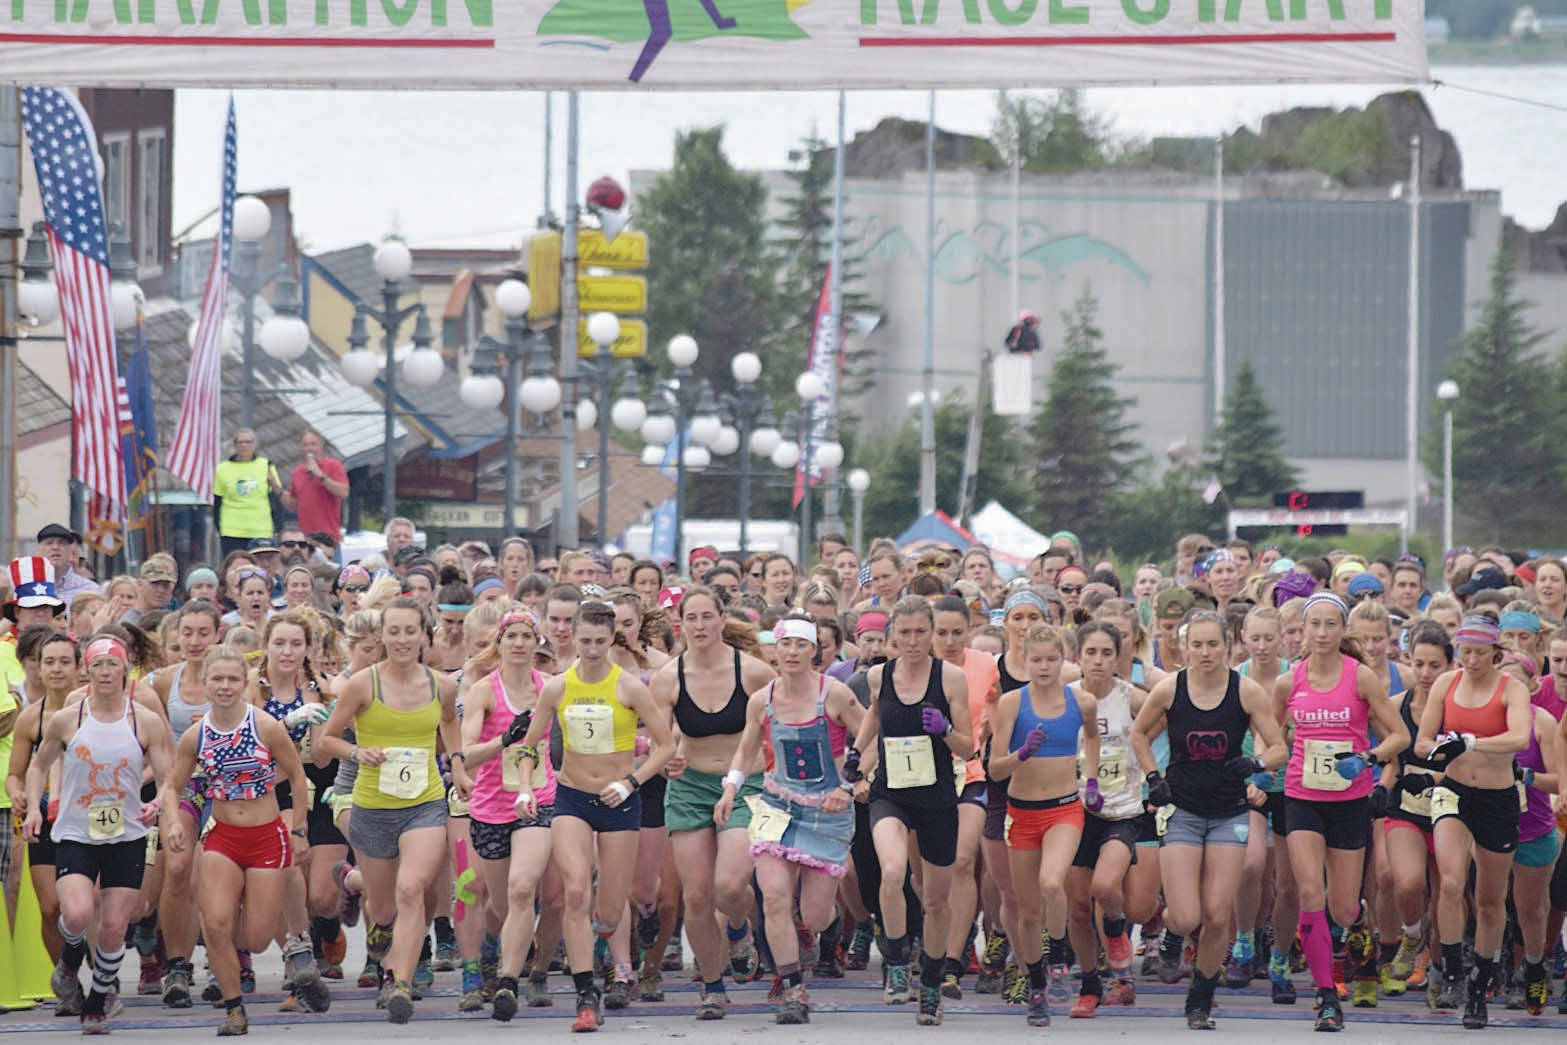 Jeff Helminiak/Peninsula Clarion
The women’s field takes to the course in 2017 at the Mount Marathon Race in Seward.